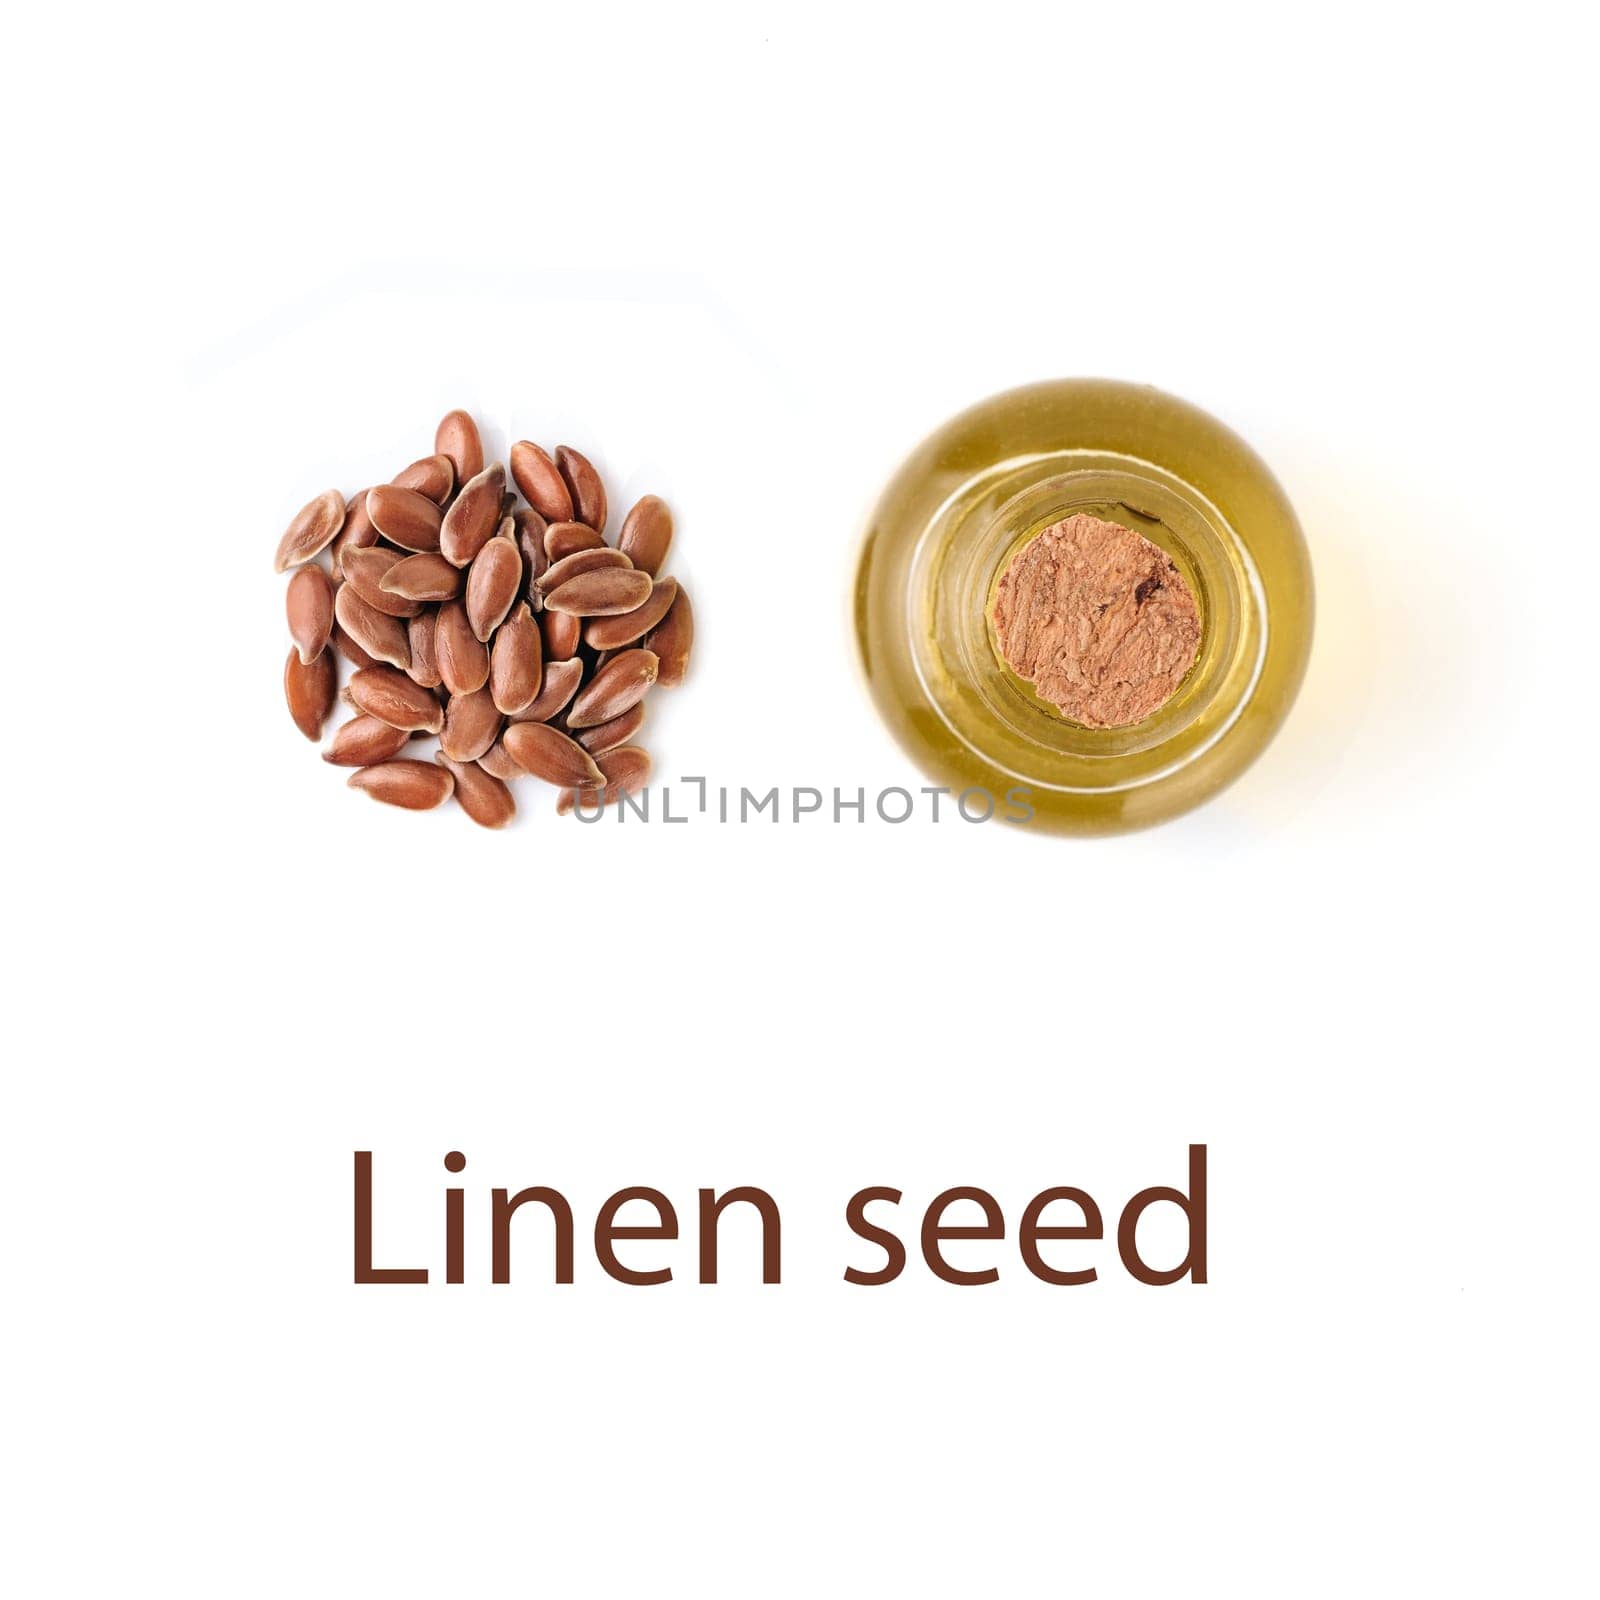 Linen seeds and linen raw oil isolated on white background - creative layout. Heap of flax seeds and raw flax seed oil in small glass bottle isolated on white with clipping path, top view or flat lay